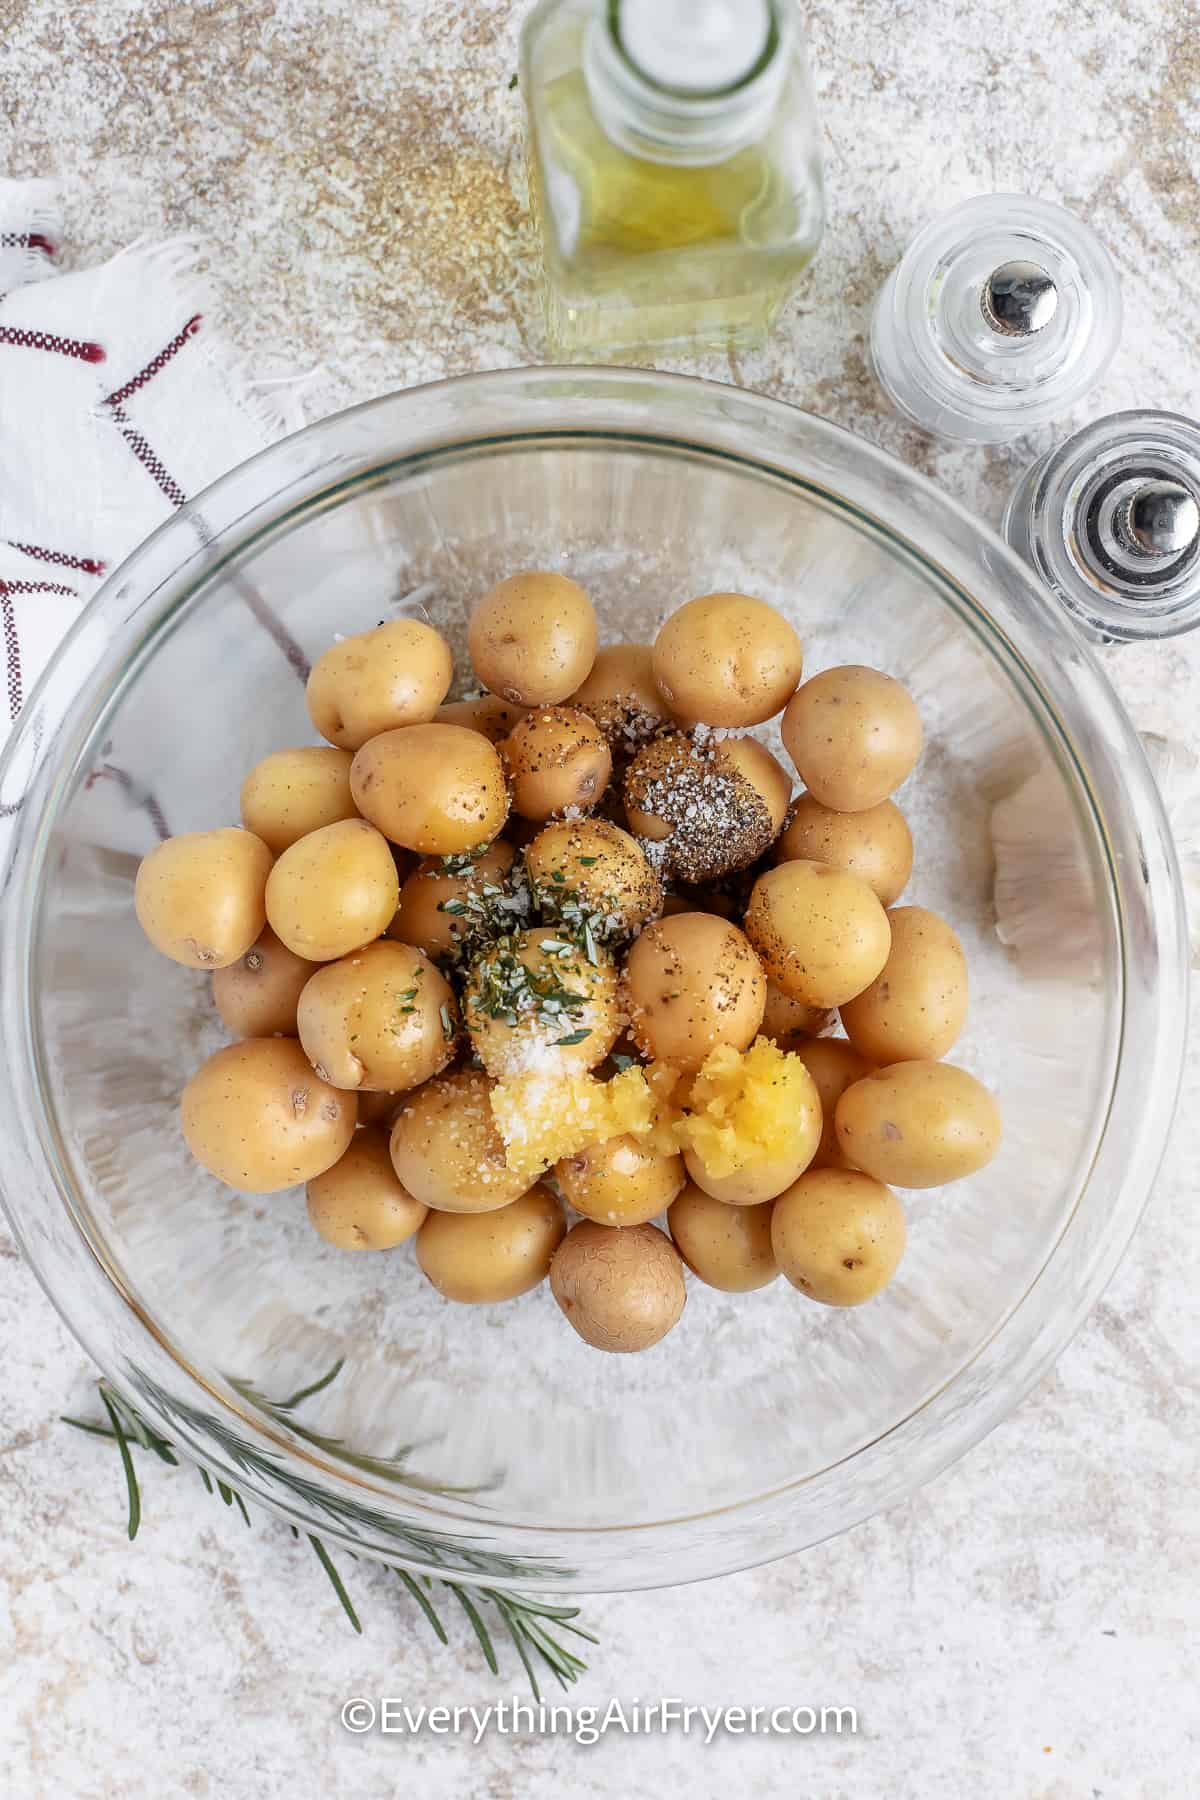 baby potatoes and other ingredients in a bowl